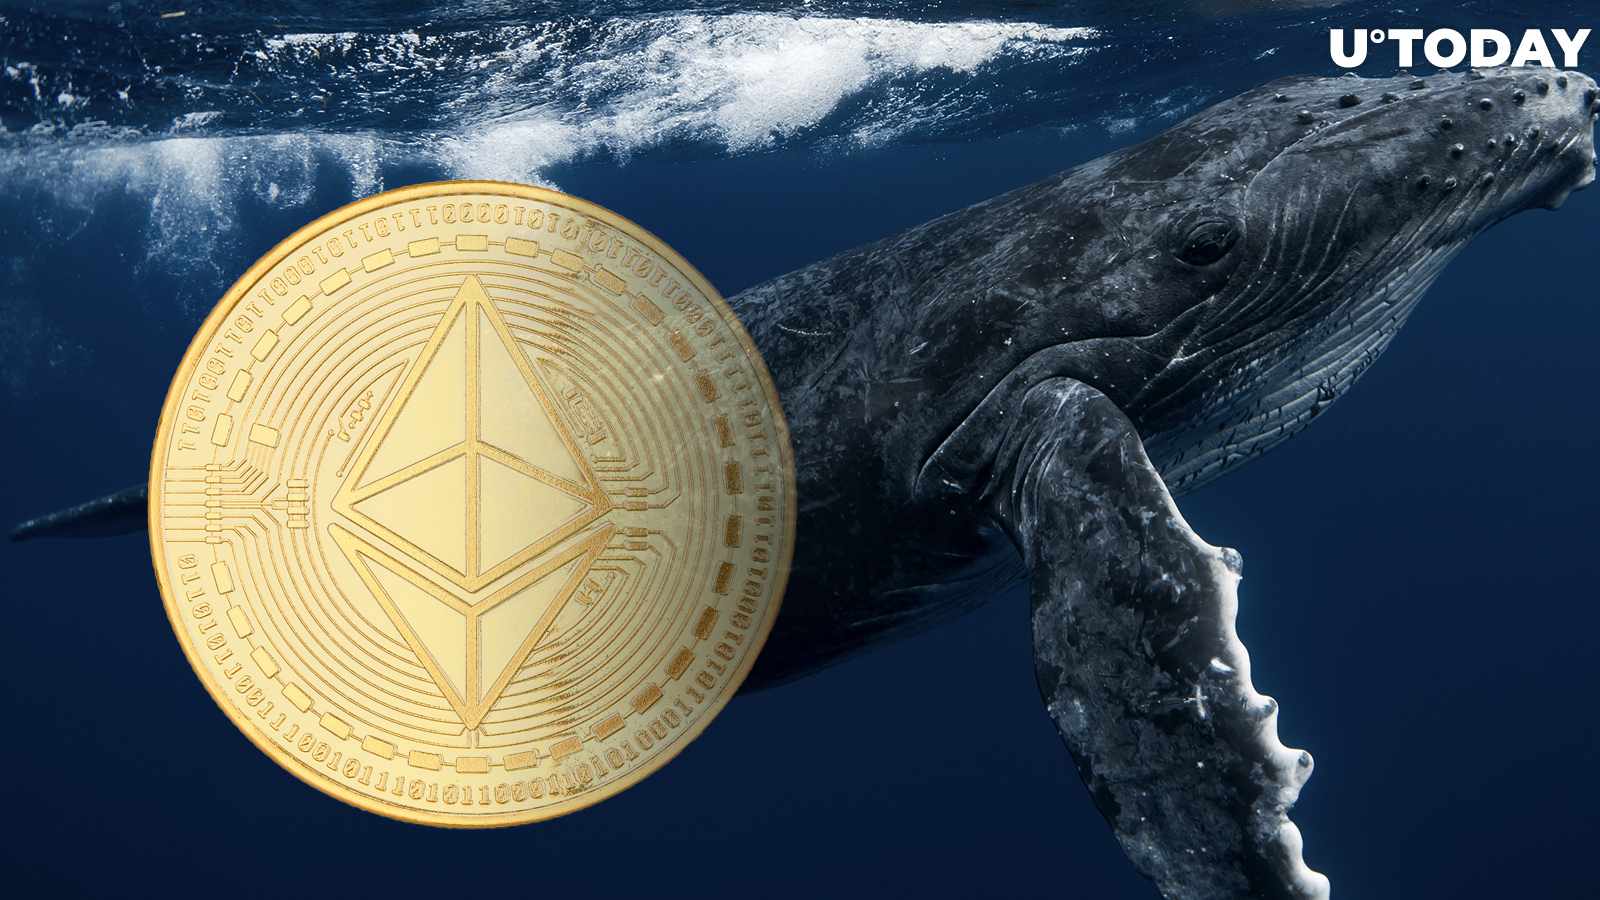 Ethereum (ETH) Whales Selling Their Holdings, What's Happening?